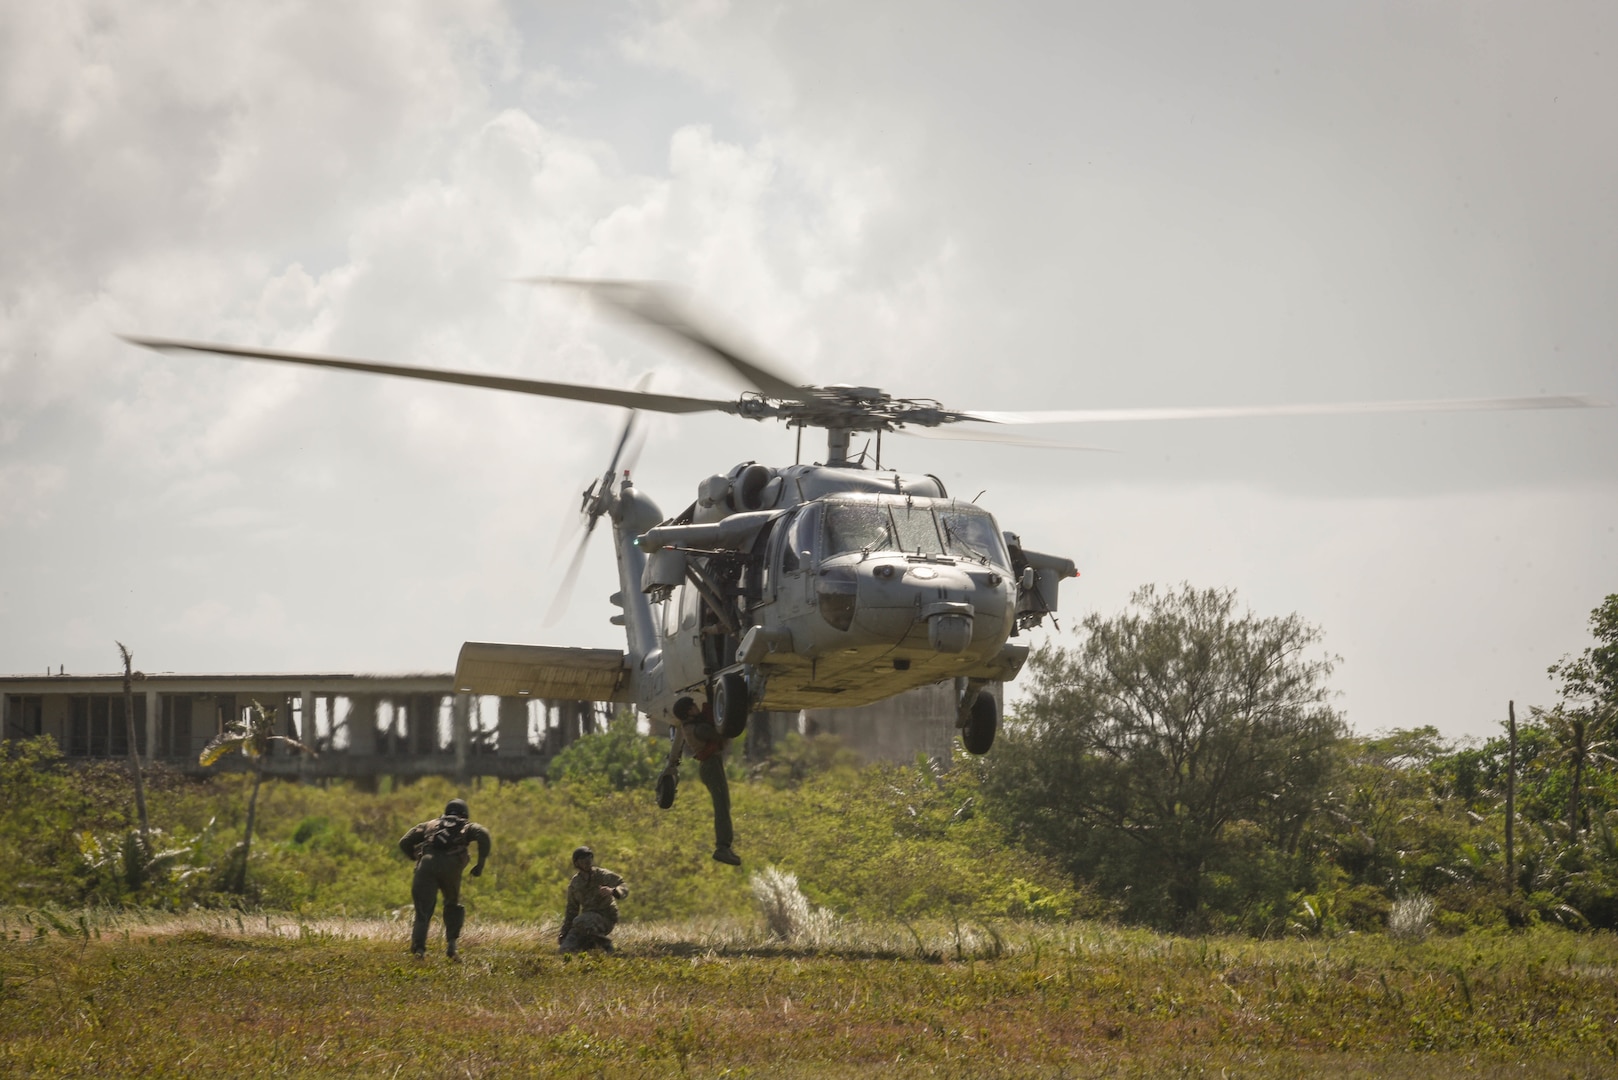 A U.S. Airman from the 9th Expeditionary Bomb Squadron descends from a U.S. Navy MH-60 Seahawk, assigned to Helicopter Sea Combat Squadron Two-Five, during a combat search and rescue training exercise June 5, 2017, at Andersen South, Guam. Service members from Task Force Talon, HSC-25, and the 36th Wing joined together to practice survival, evasion, resistance and escape procedures, emergency evacuation techniques and quick reaction force training. This is the first time these units participated in a combat search and rescue exercise together on Guam. 